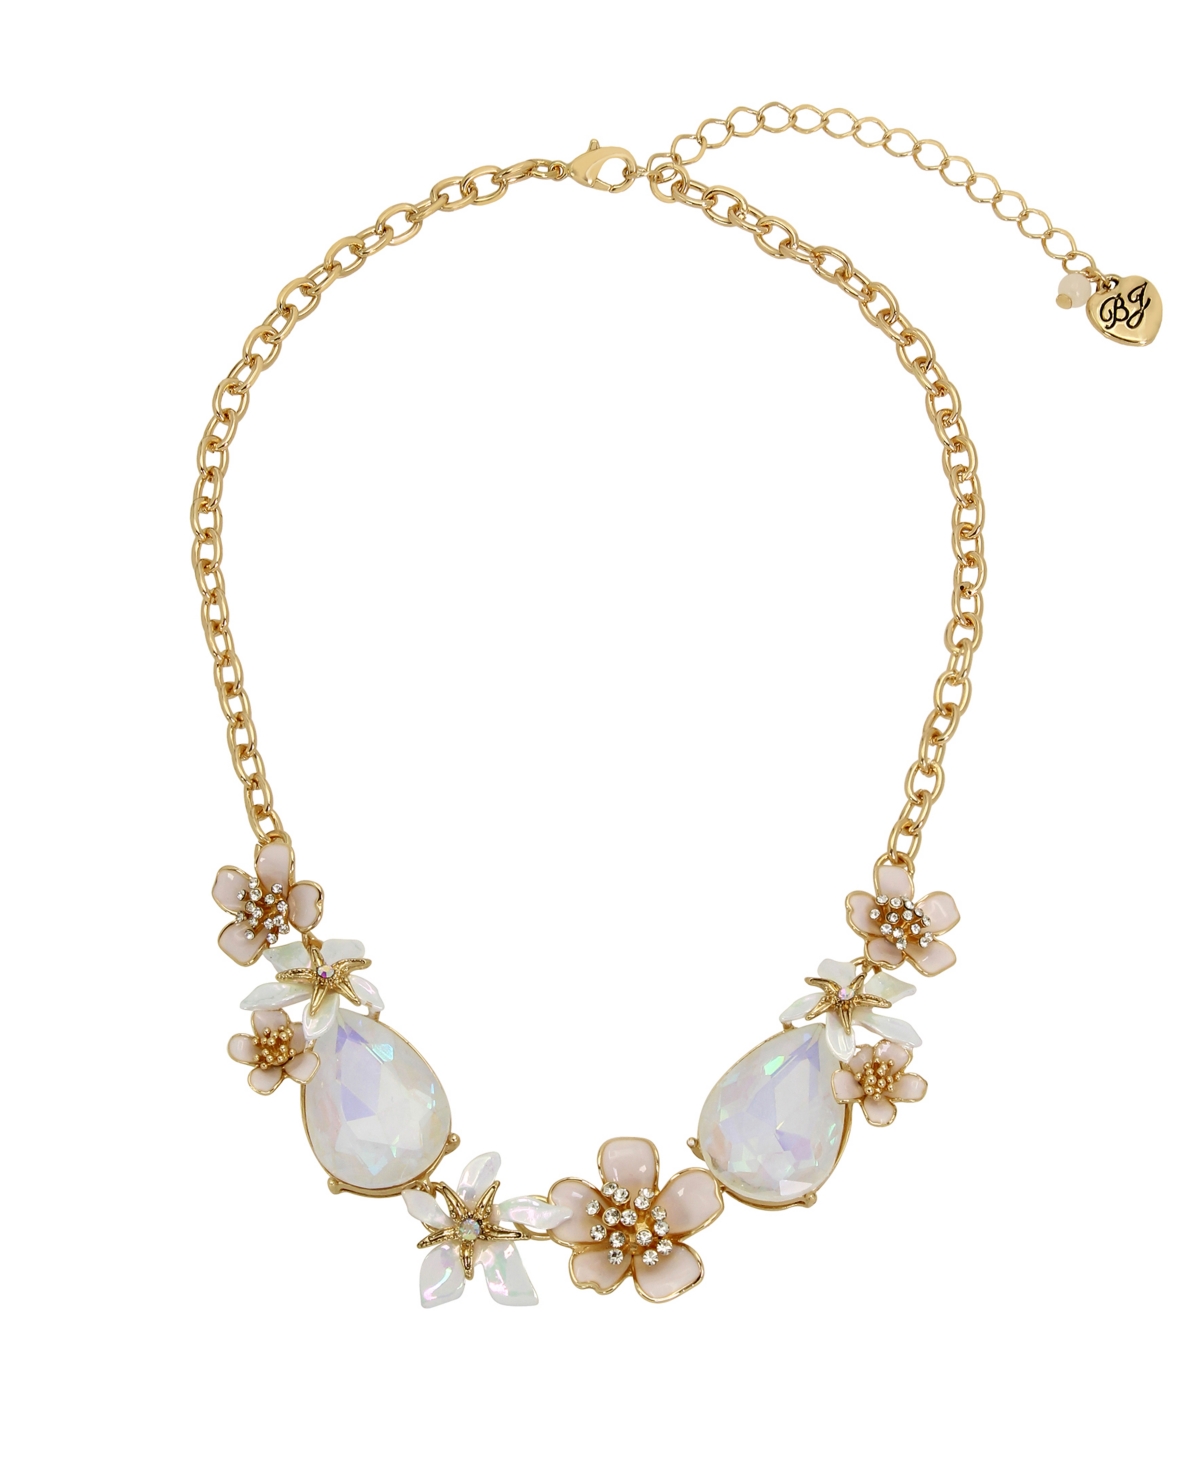 Betsey Johnson Faux Stone Starfish Flower Bib Necklace In White,gold